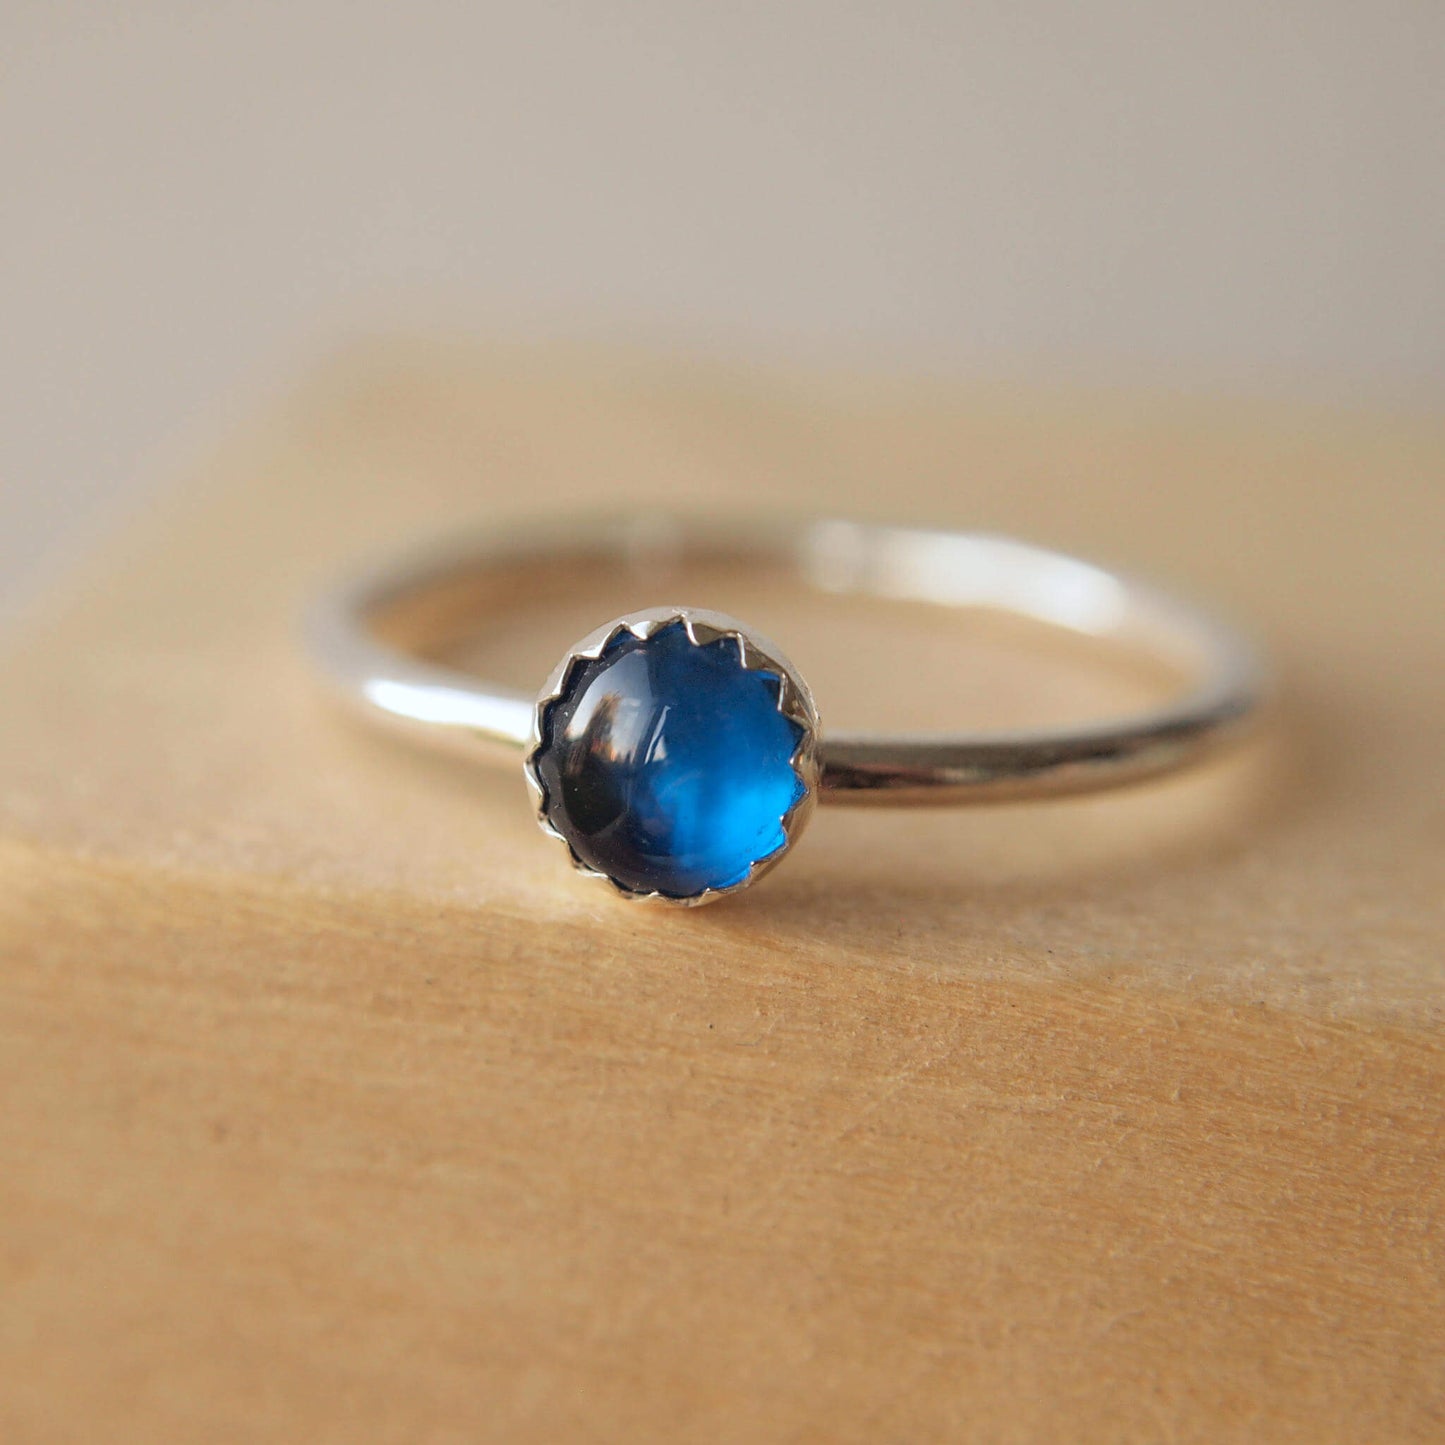 Simple styled silver and blue gemstone ring with a lab sapphire round stone on a silver band. The ring is made from a 5mm round cabochon in bright blue. Handmade to your choice of ring size by maram jewellery in Scotland